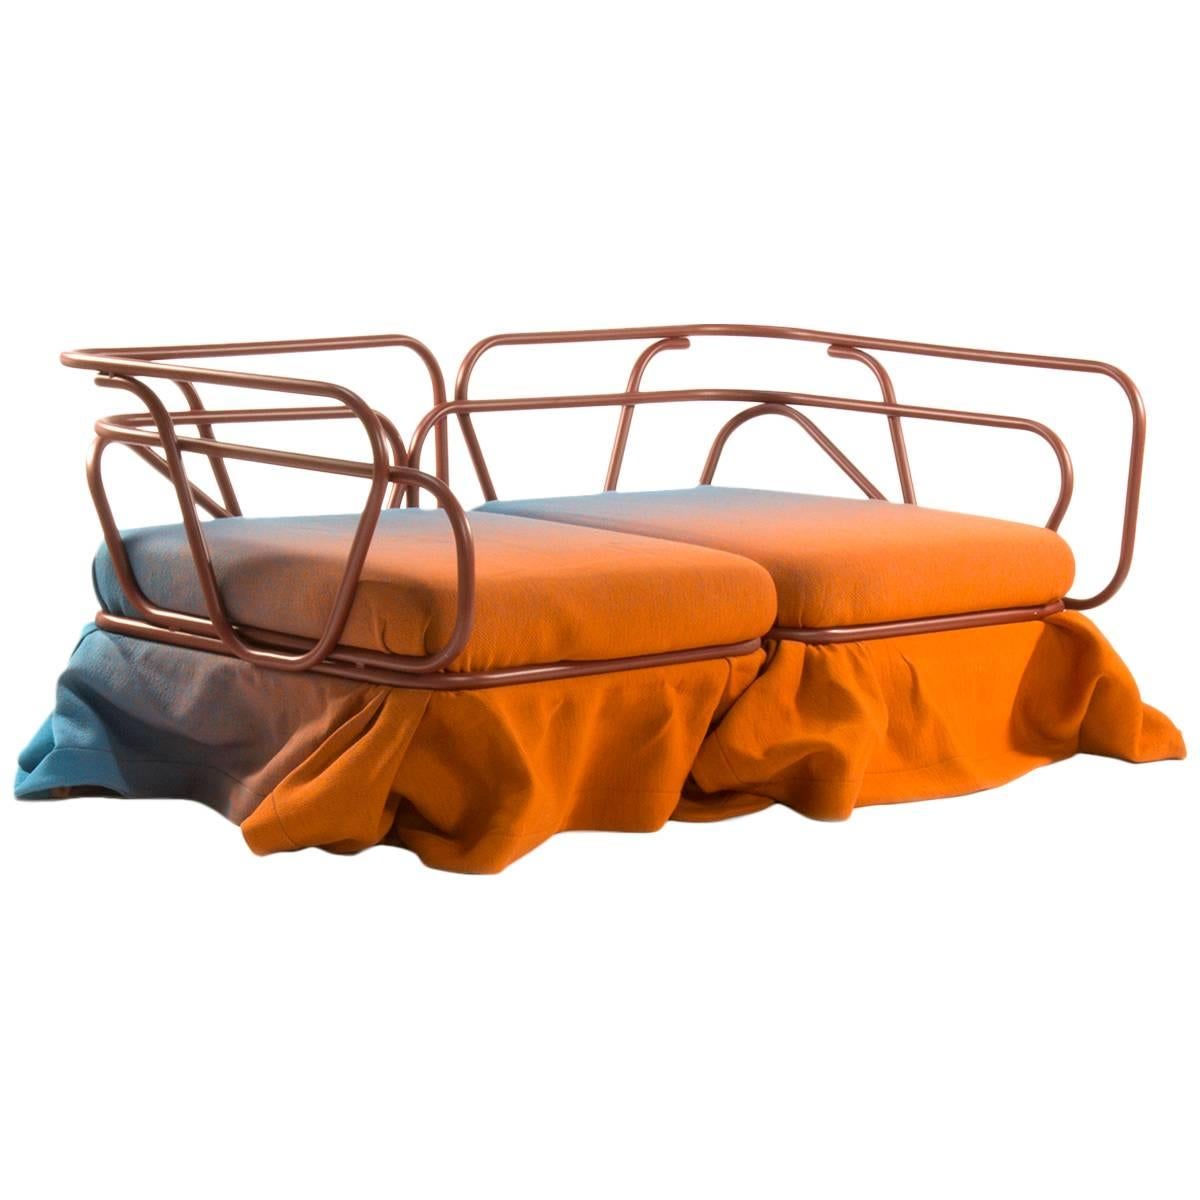 Moroso Metal Frame Oasis Daybed Sofa by Atelier Oi, Italy For Sale